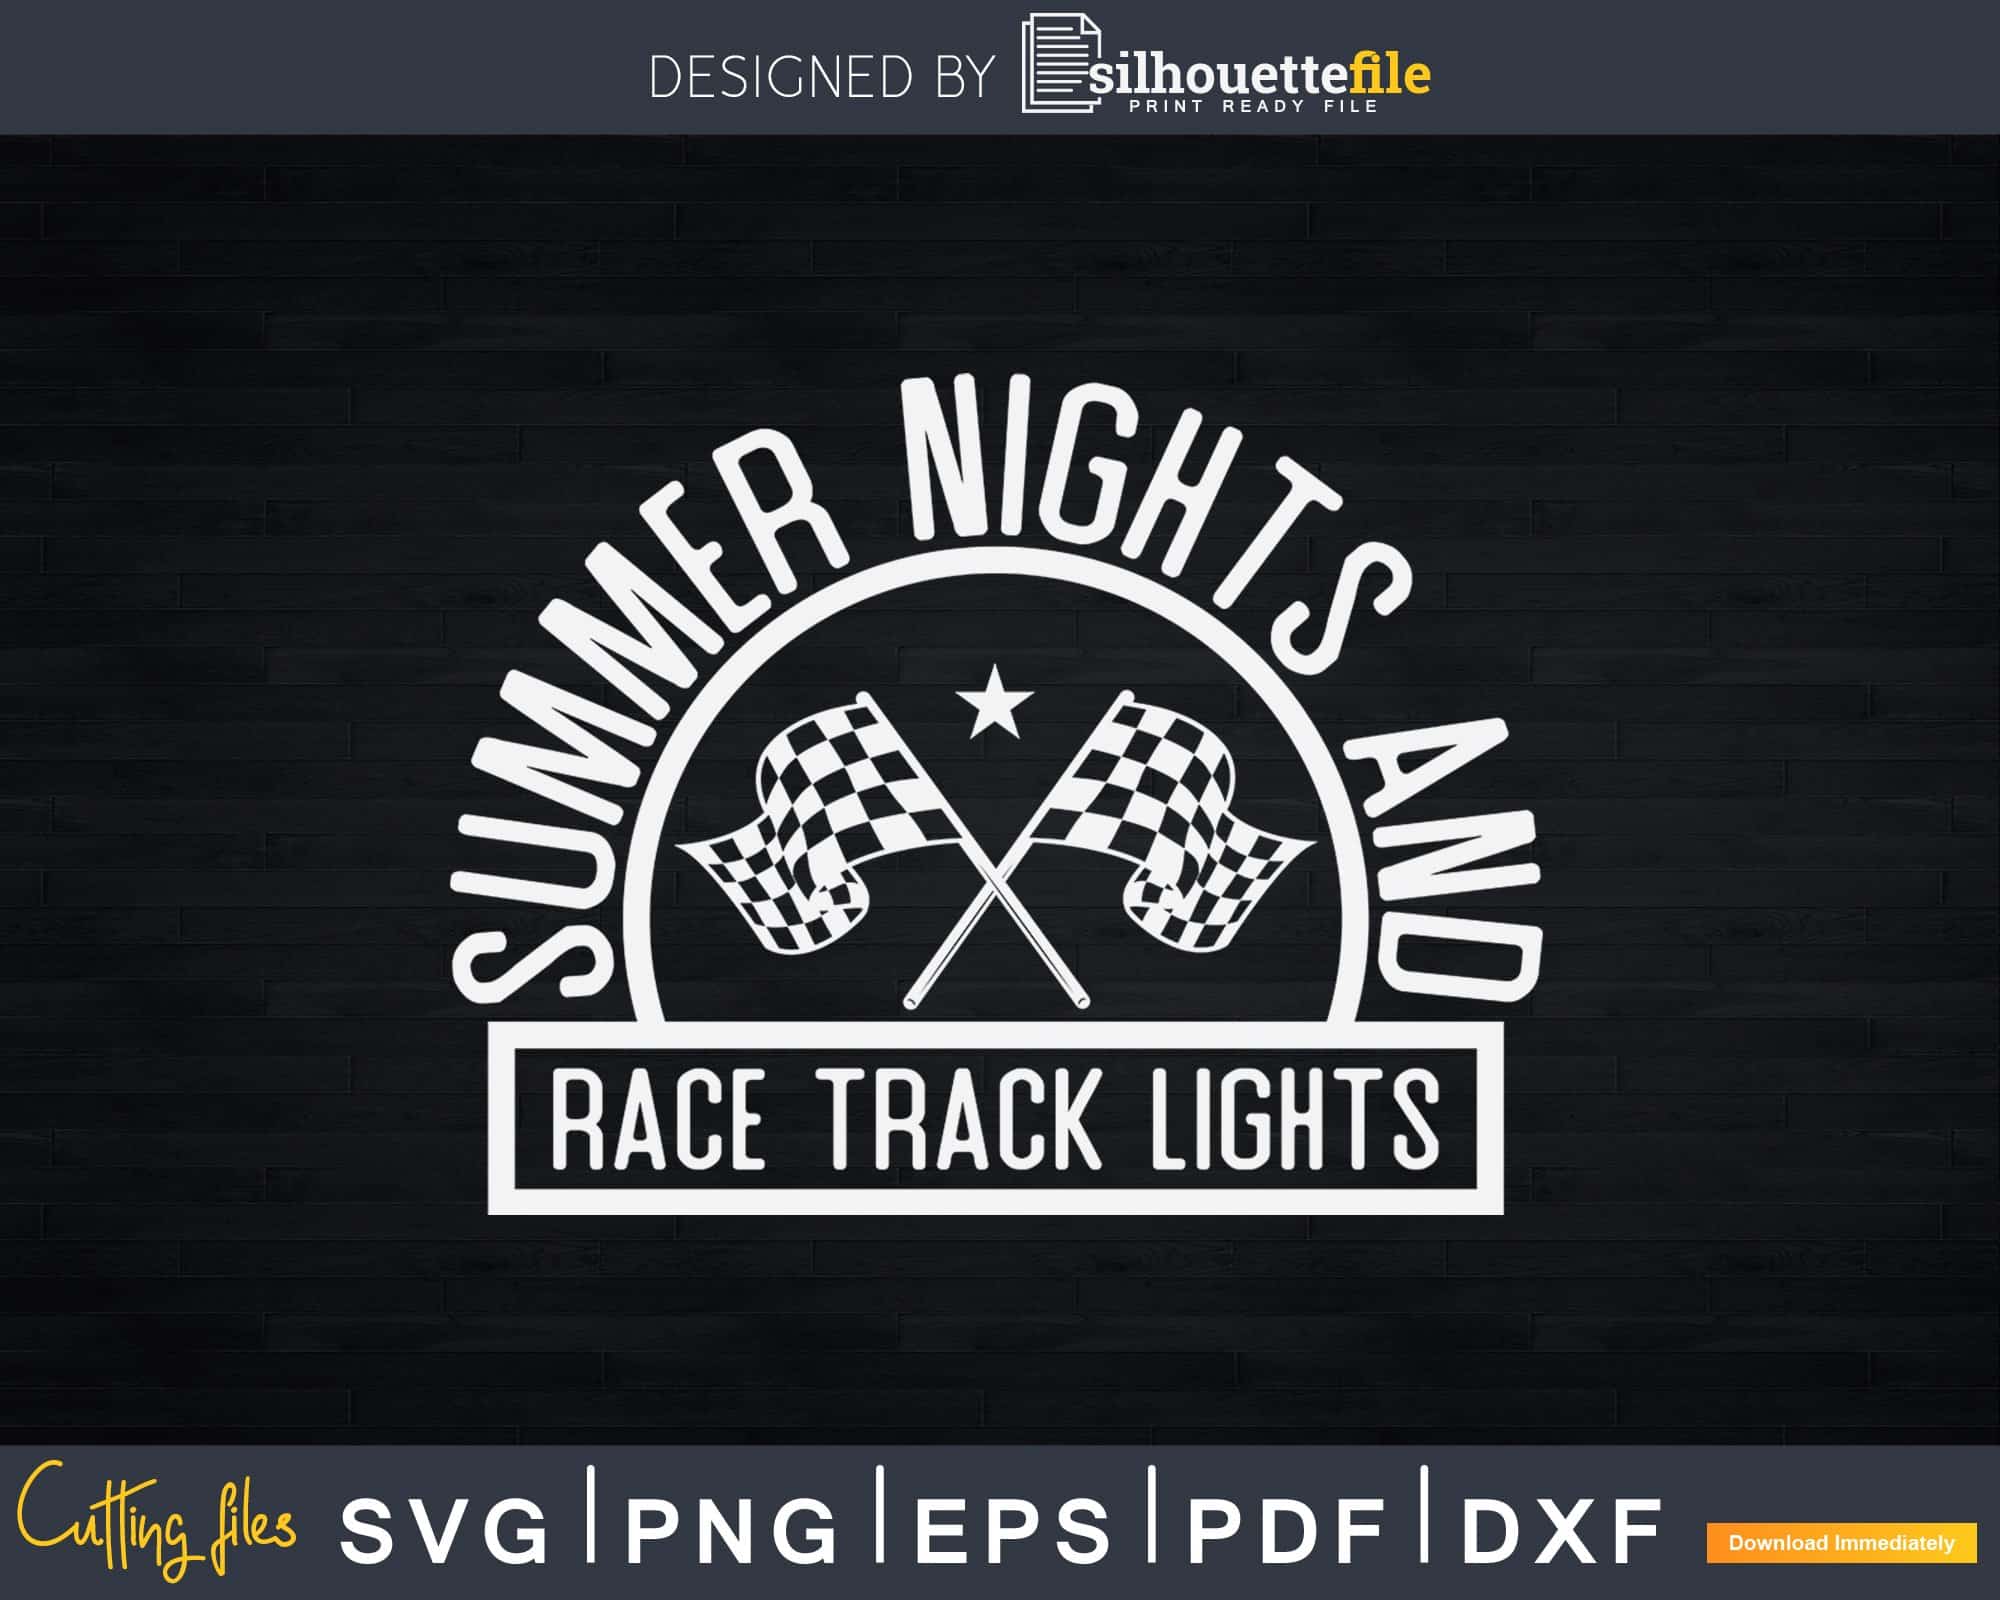 Summer Nights And Race Track Lights Racing Shirt Svg Design Silhouettefile